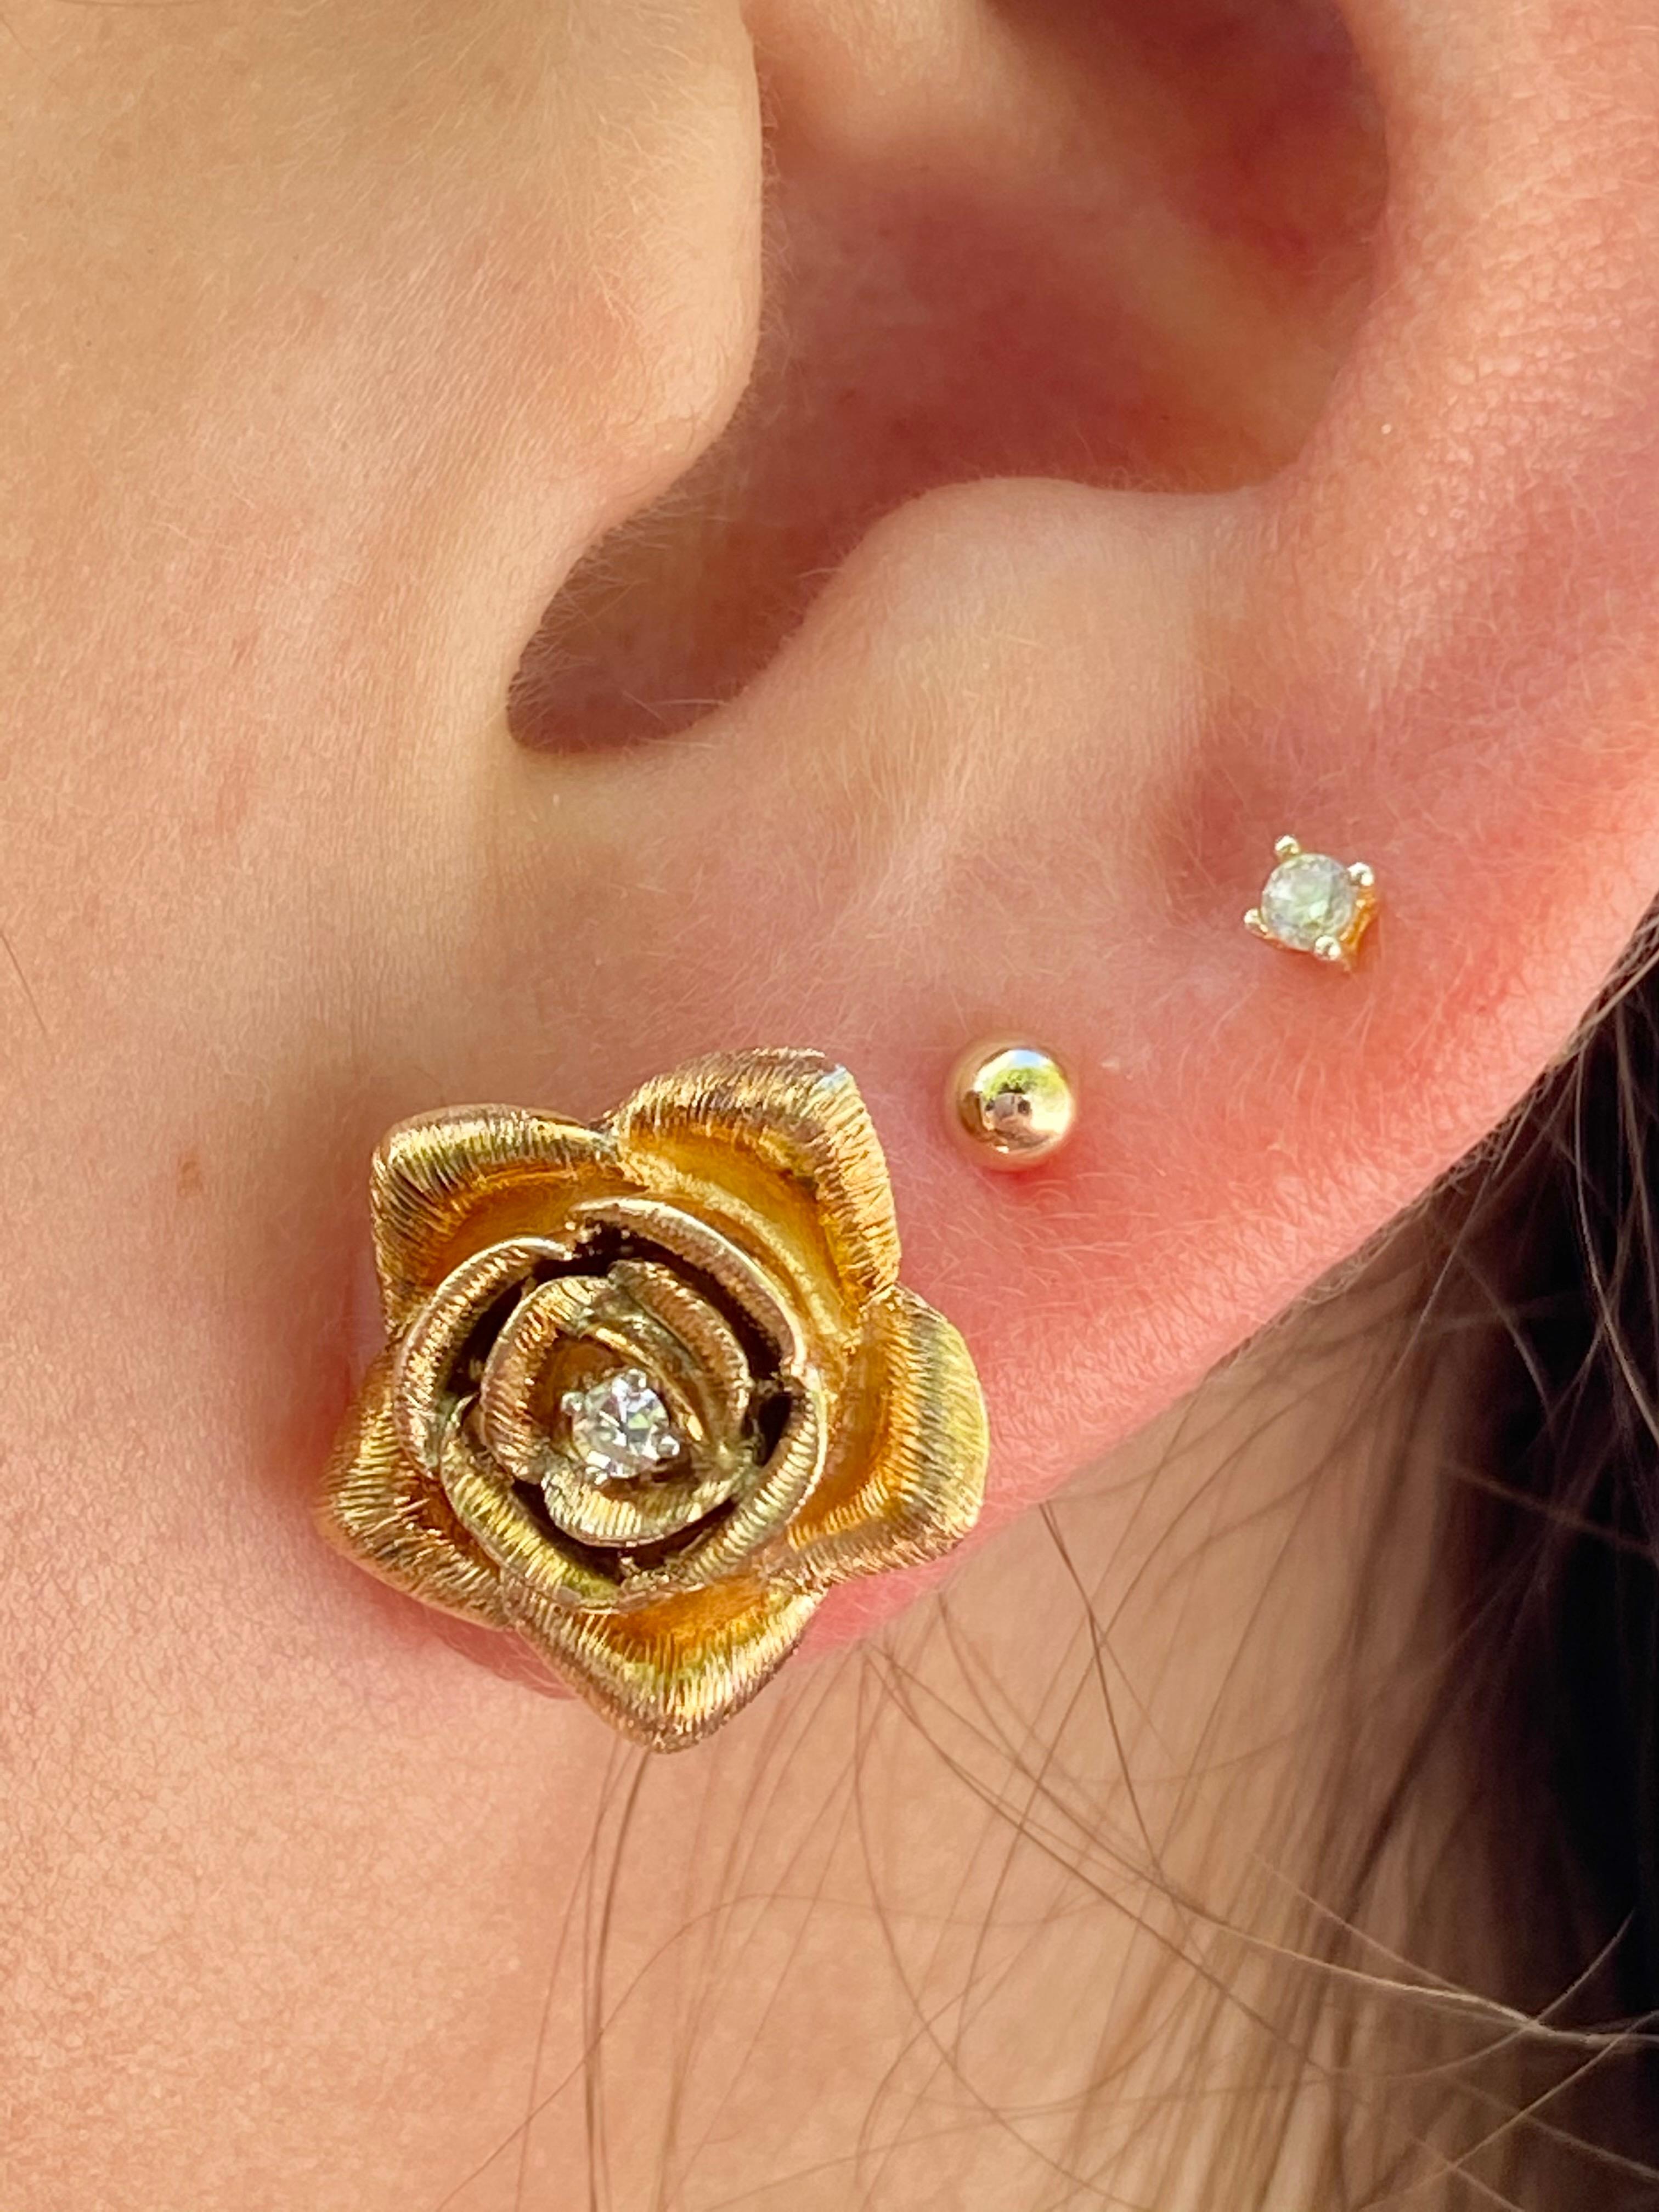 Cute and dainty 14k solid gold flower design with a natural diamond set in the center. These earrings are set in 14k gold push back closure and a brushed, texture gold finish.

Hypoallergenic and double rhodium plated for an extra shiny